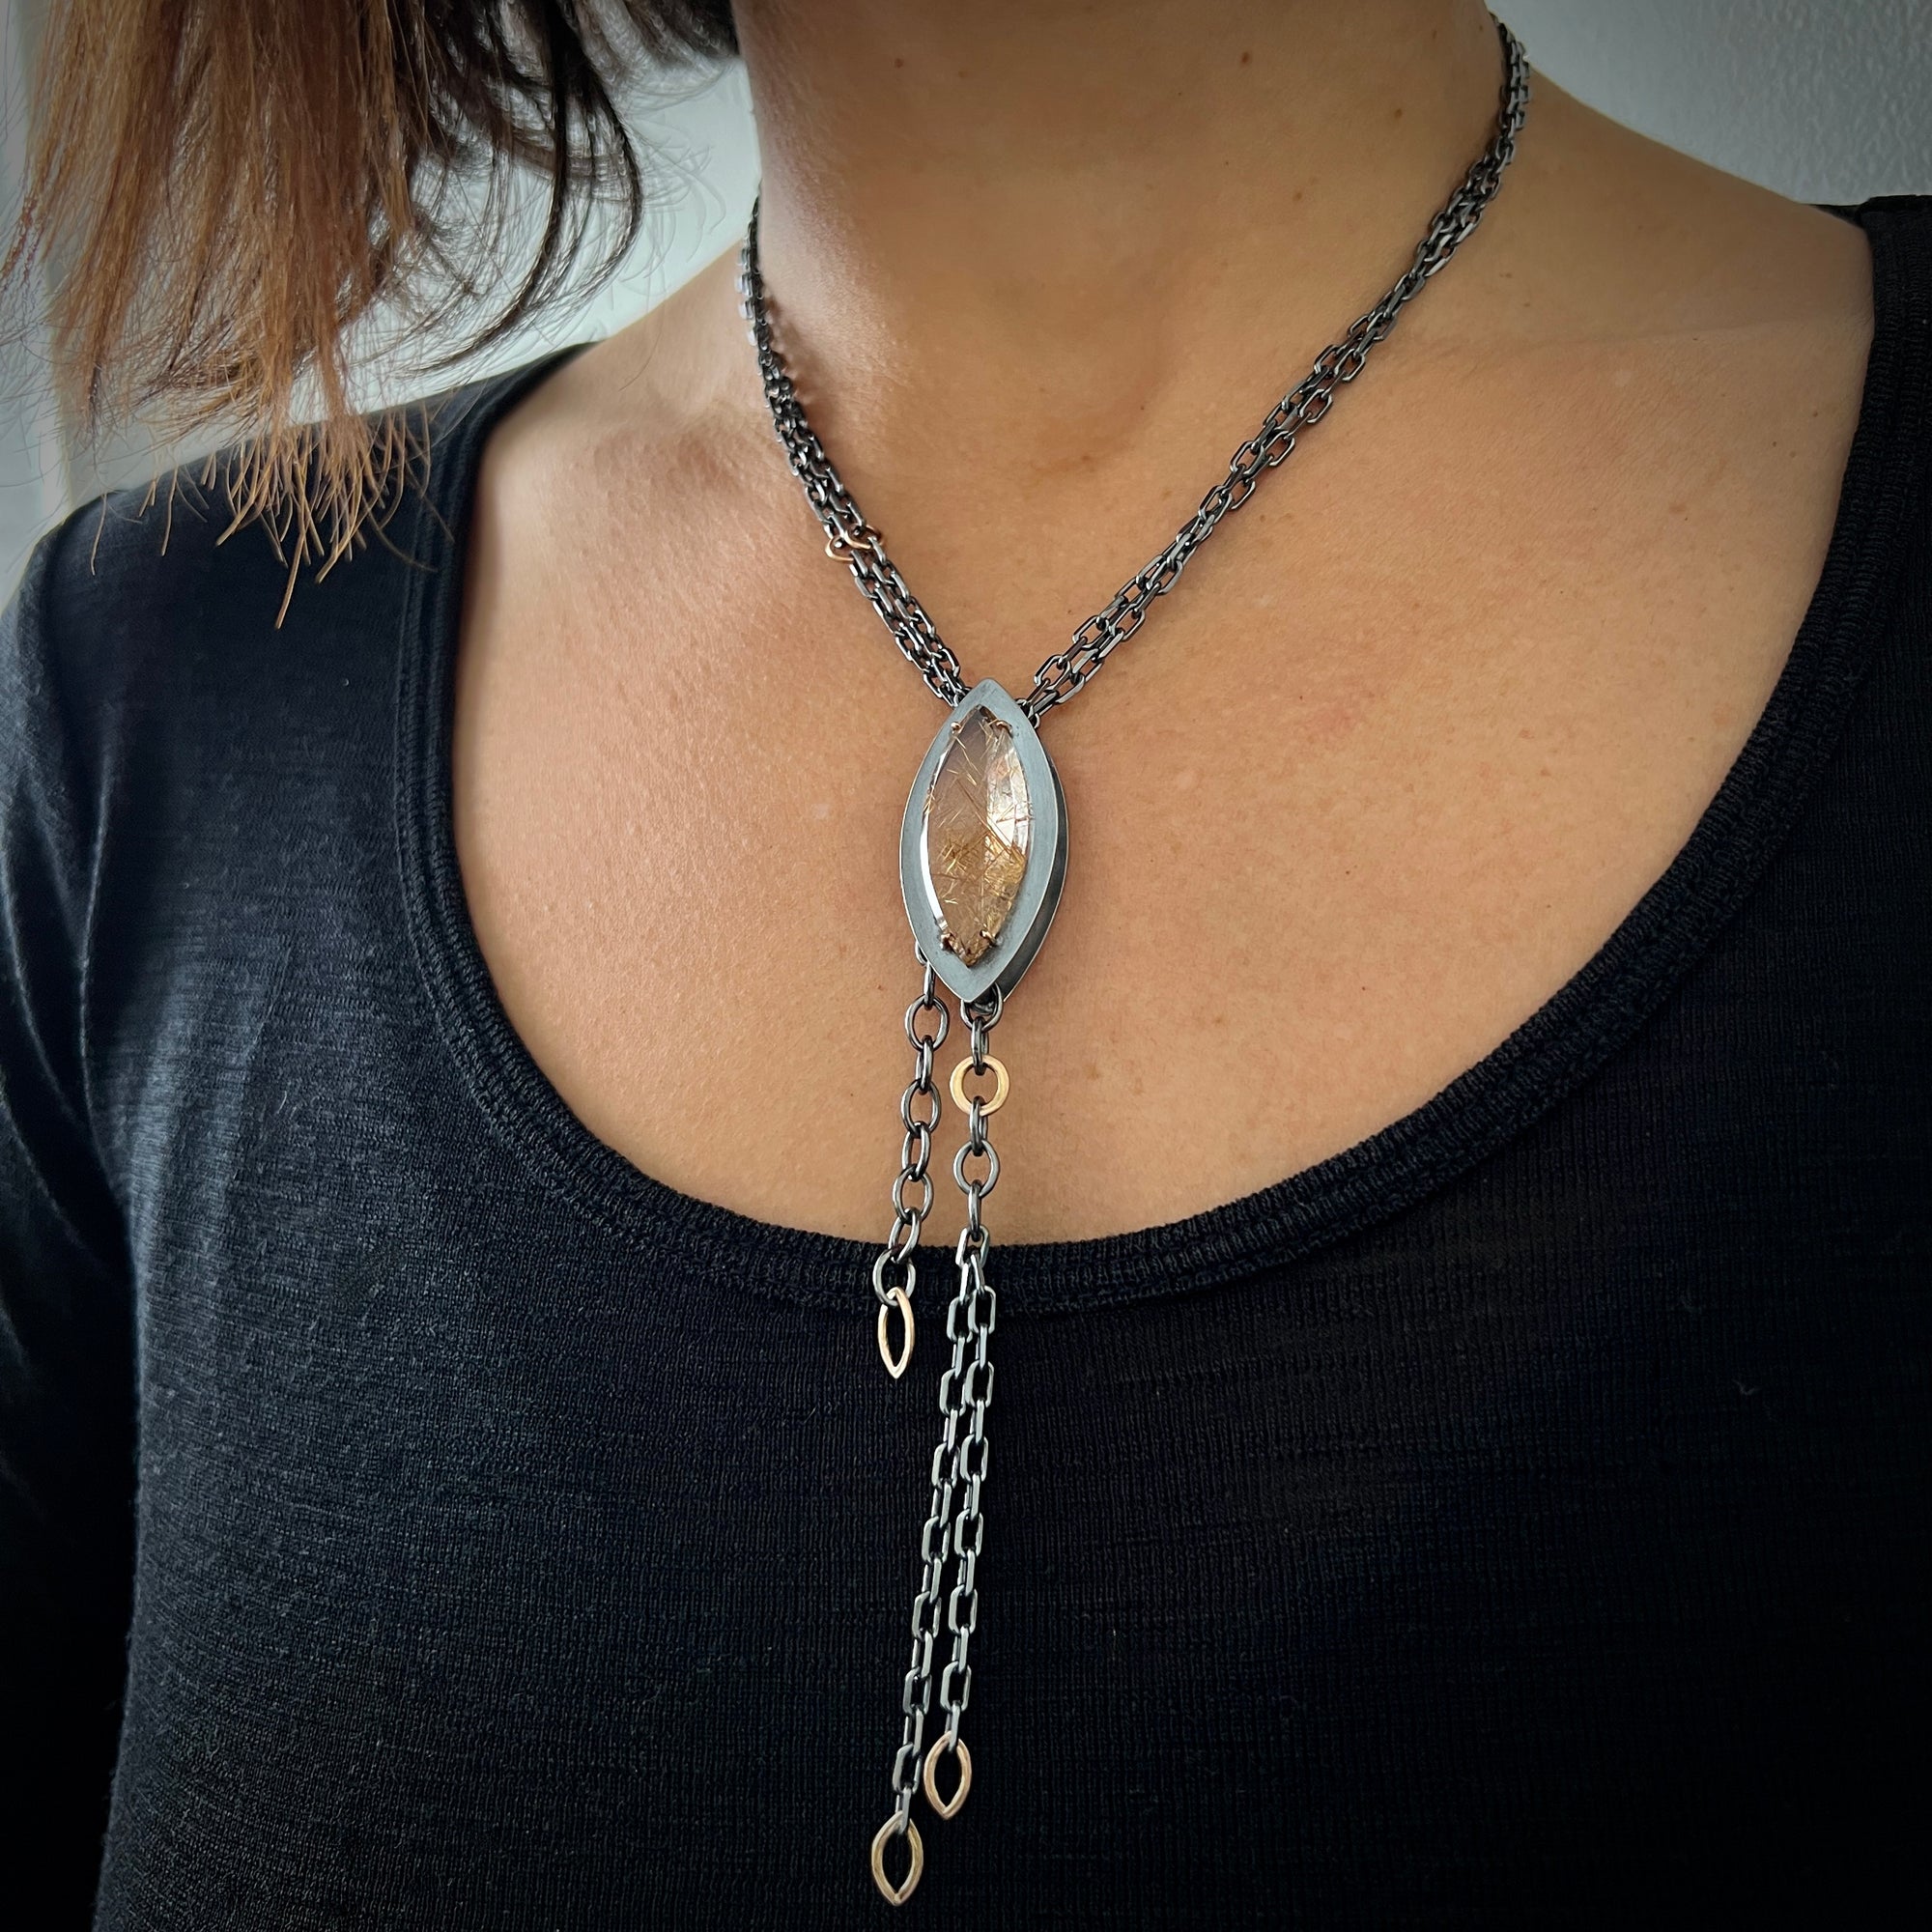 Necklace with large Marquis shaped rutilated quartz in sterling and rose gold on a multi sterling chain shown on model made by Ayesha Mayadas